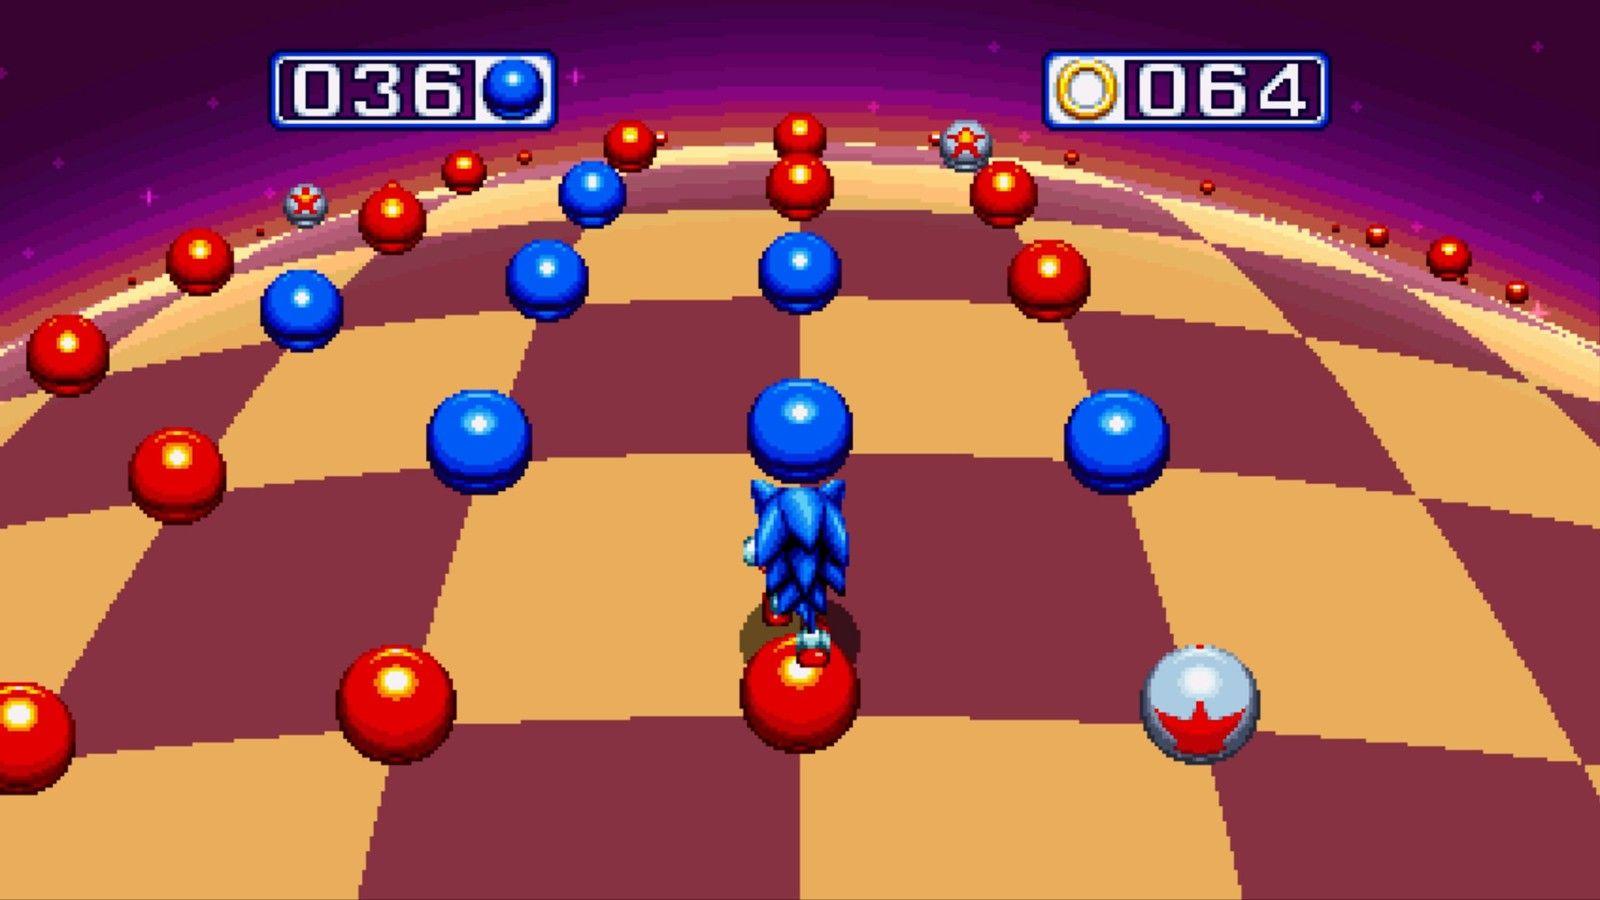 Sonic Blue Sphere Logo - Sonic Mania guide: How to beat Blue Sphere bonus stages and unlock